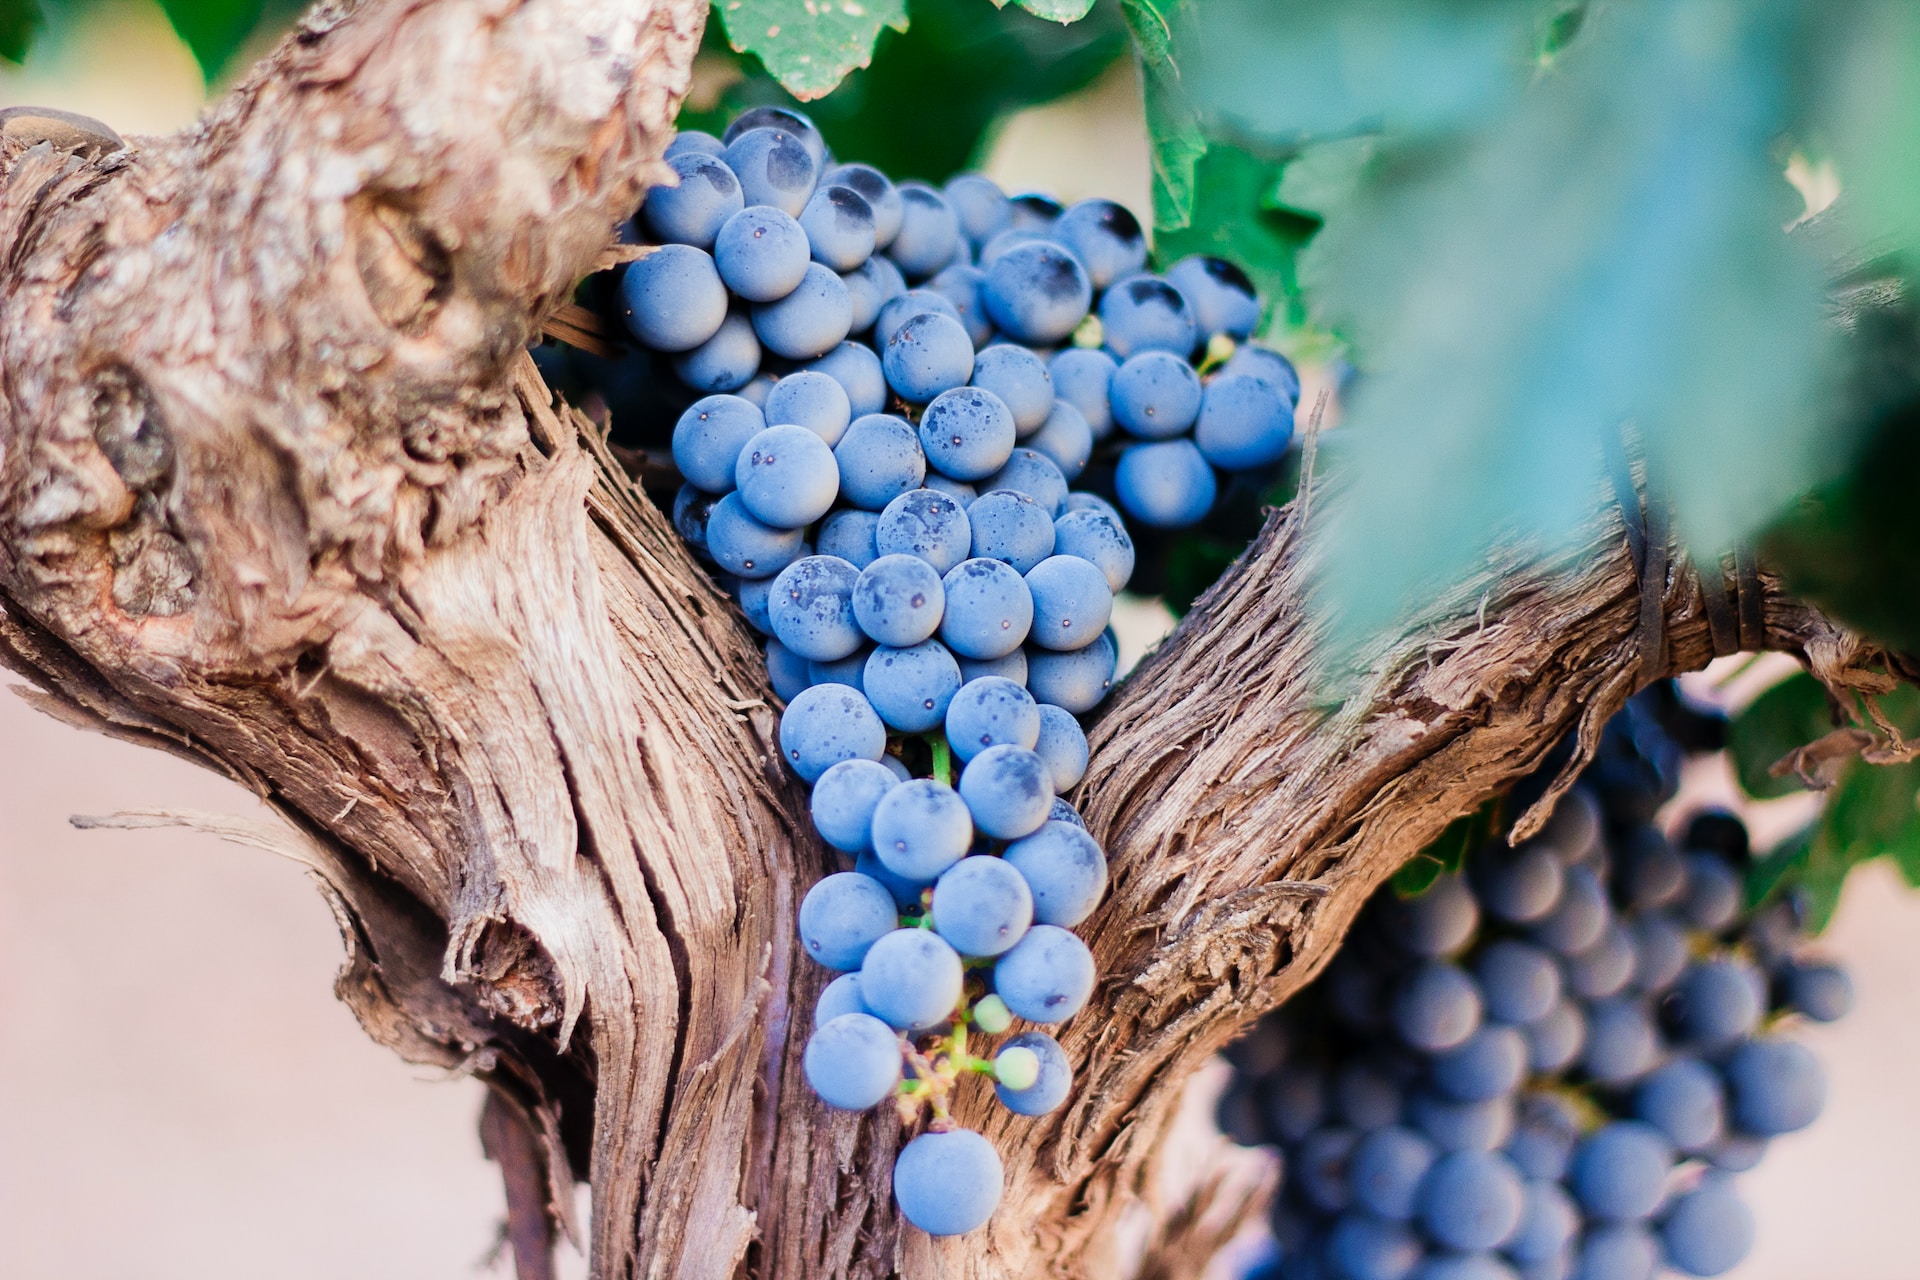 Grapes on a vine. Vingt Paris's wine services can take your collection to the next level or help you invest in winemaking ventures.